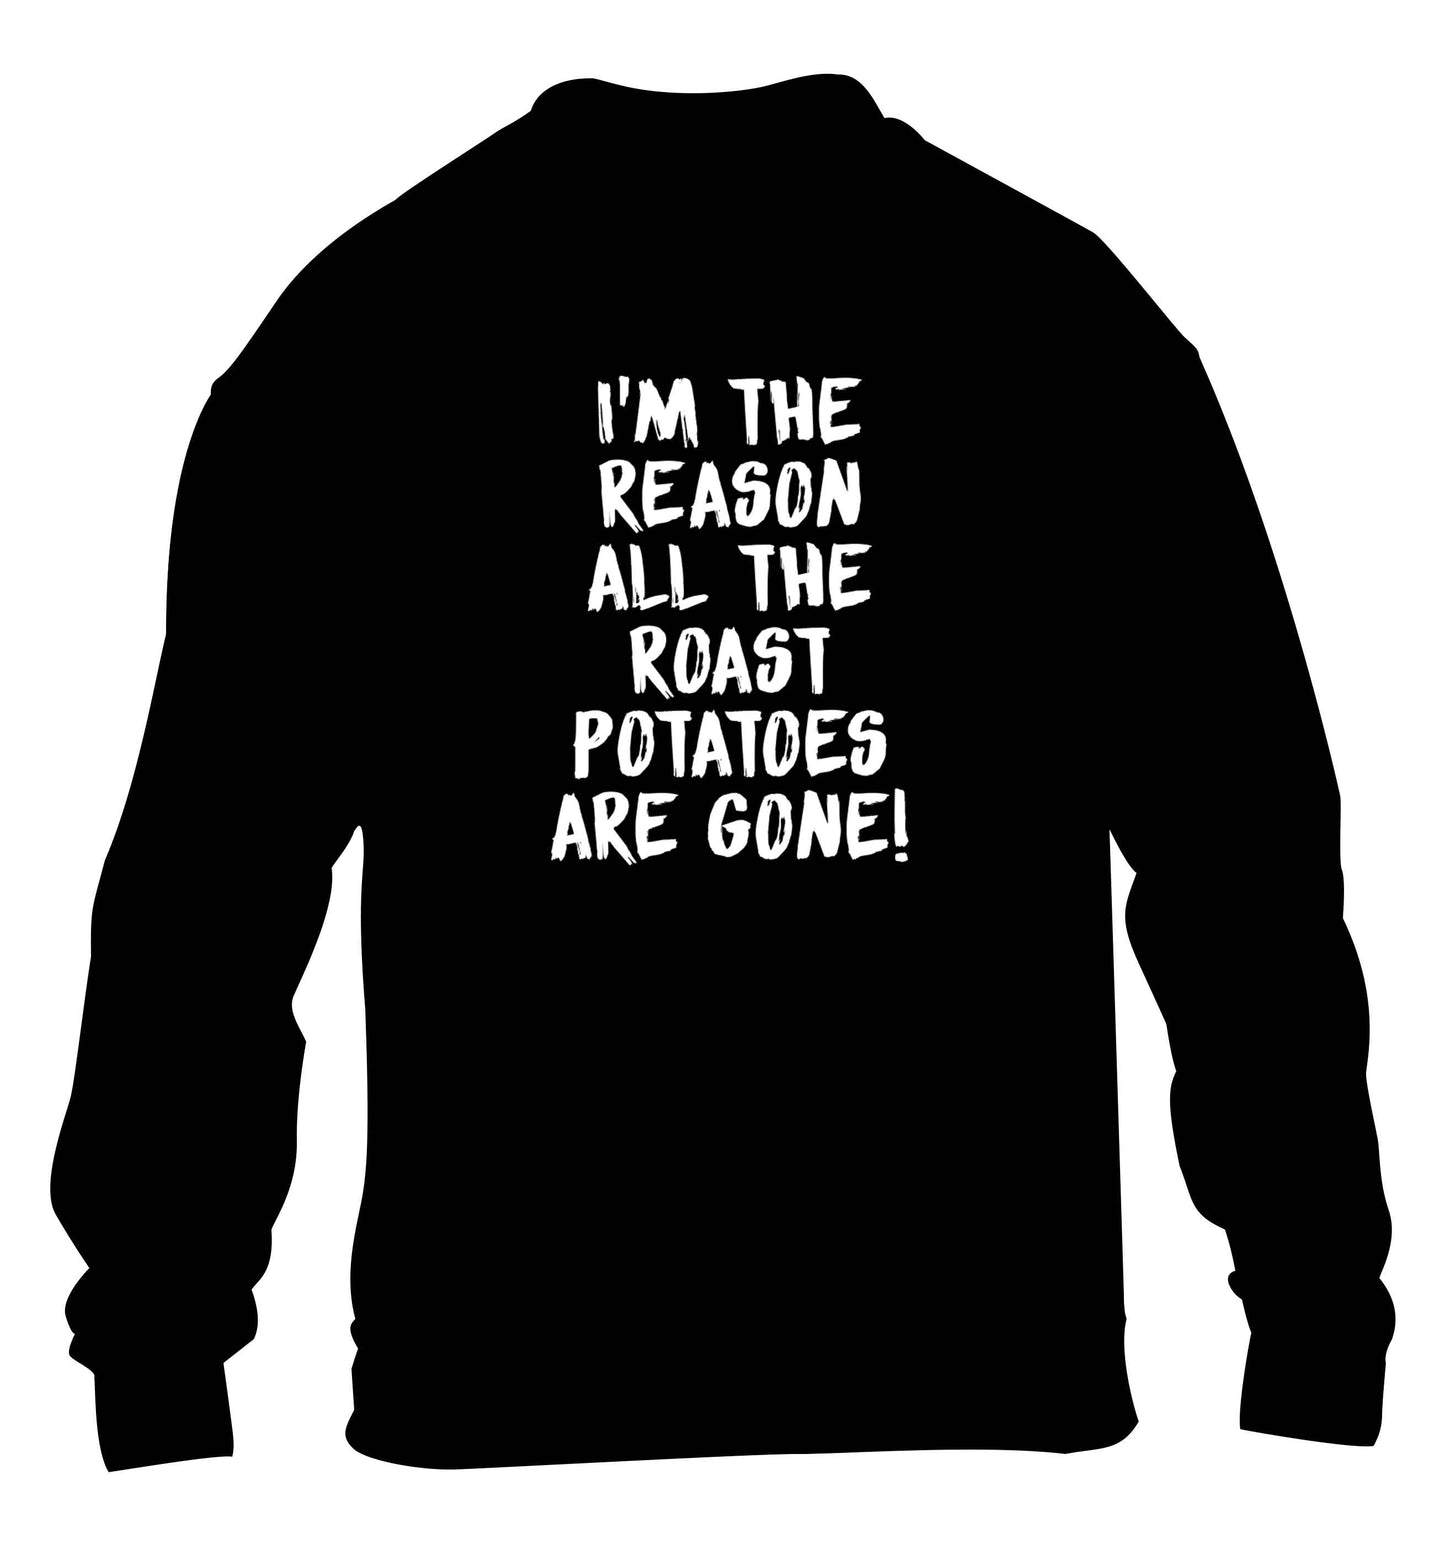 I'm the reason all the roast potatoes are gone children's black sweater 12-13 Years